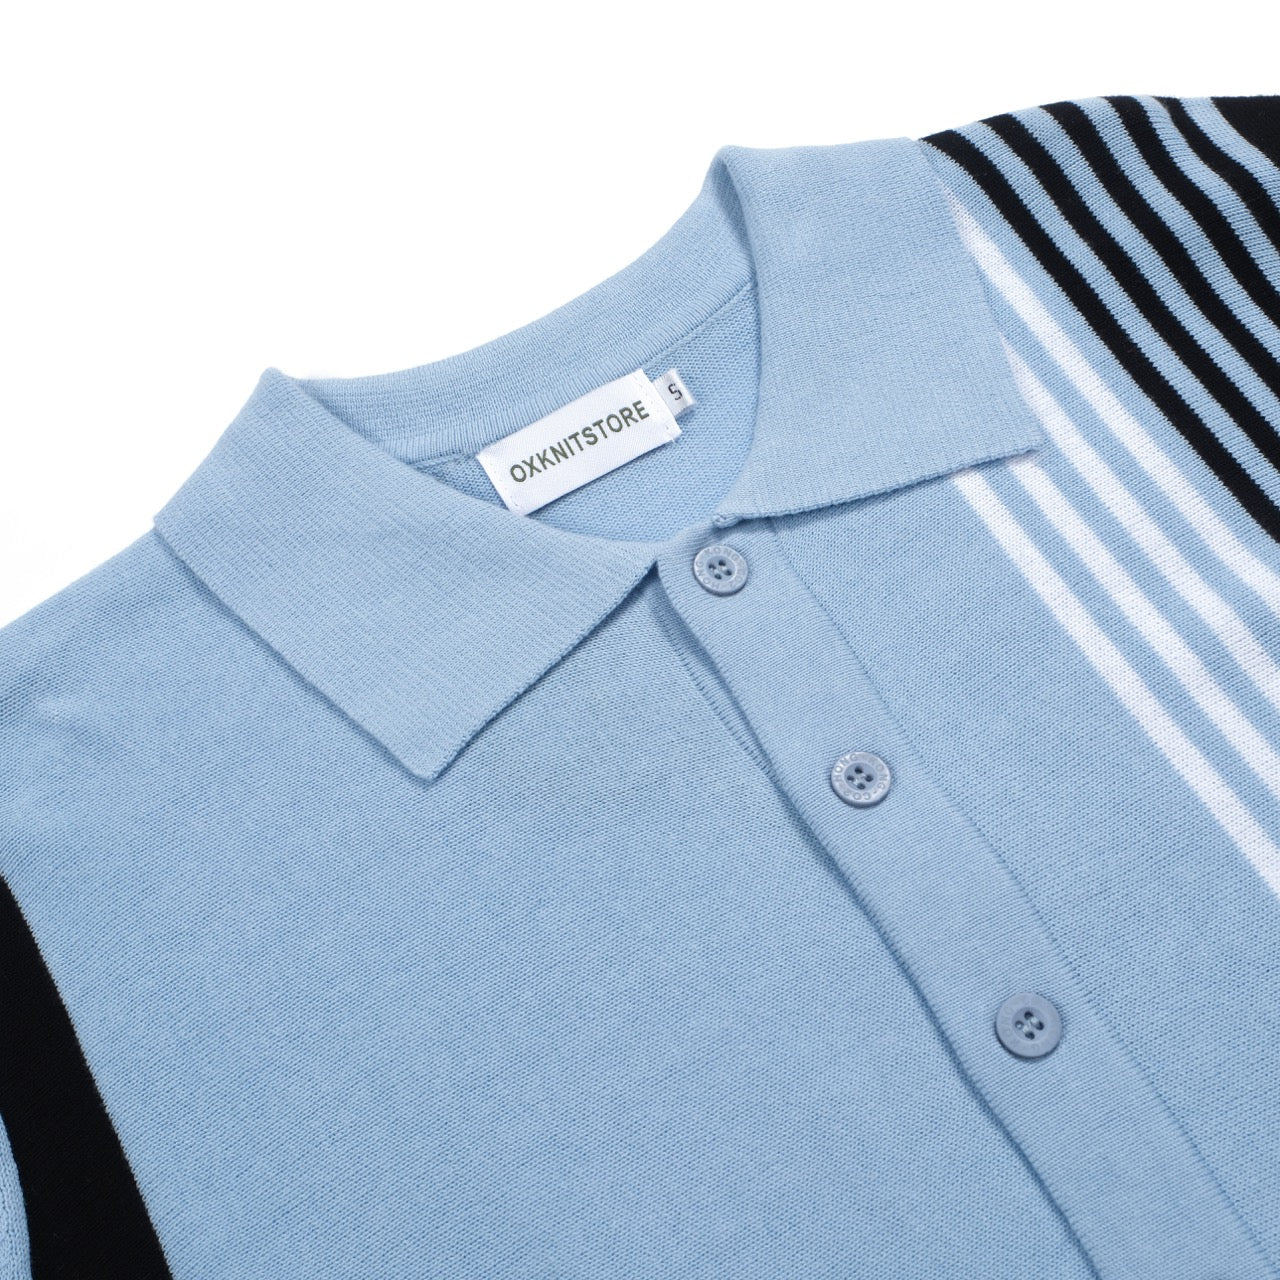 Men's Blue Knitted Long Sleeves Polo With Black & White Stripes